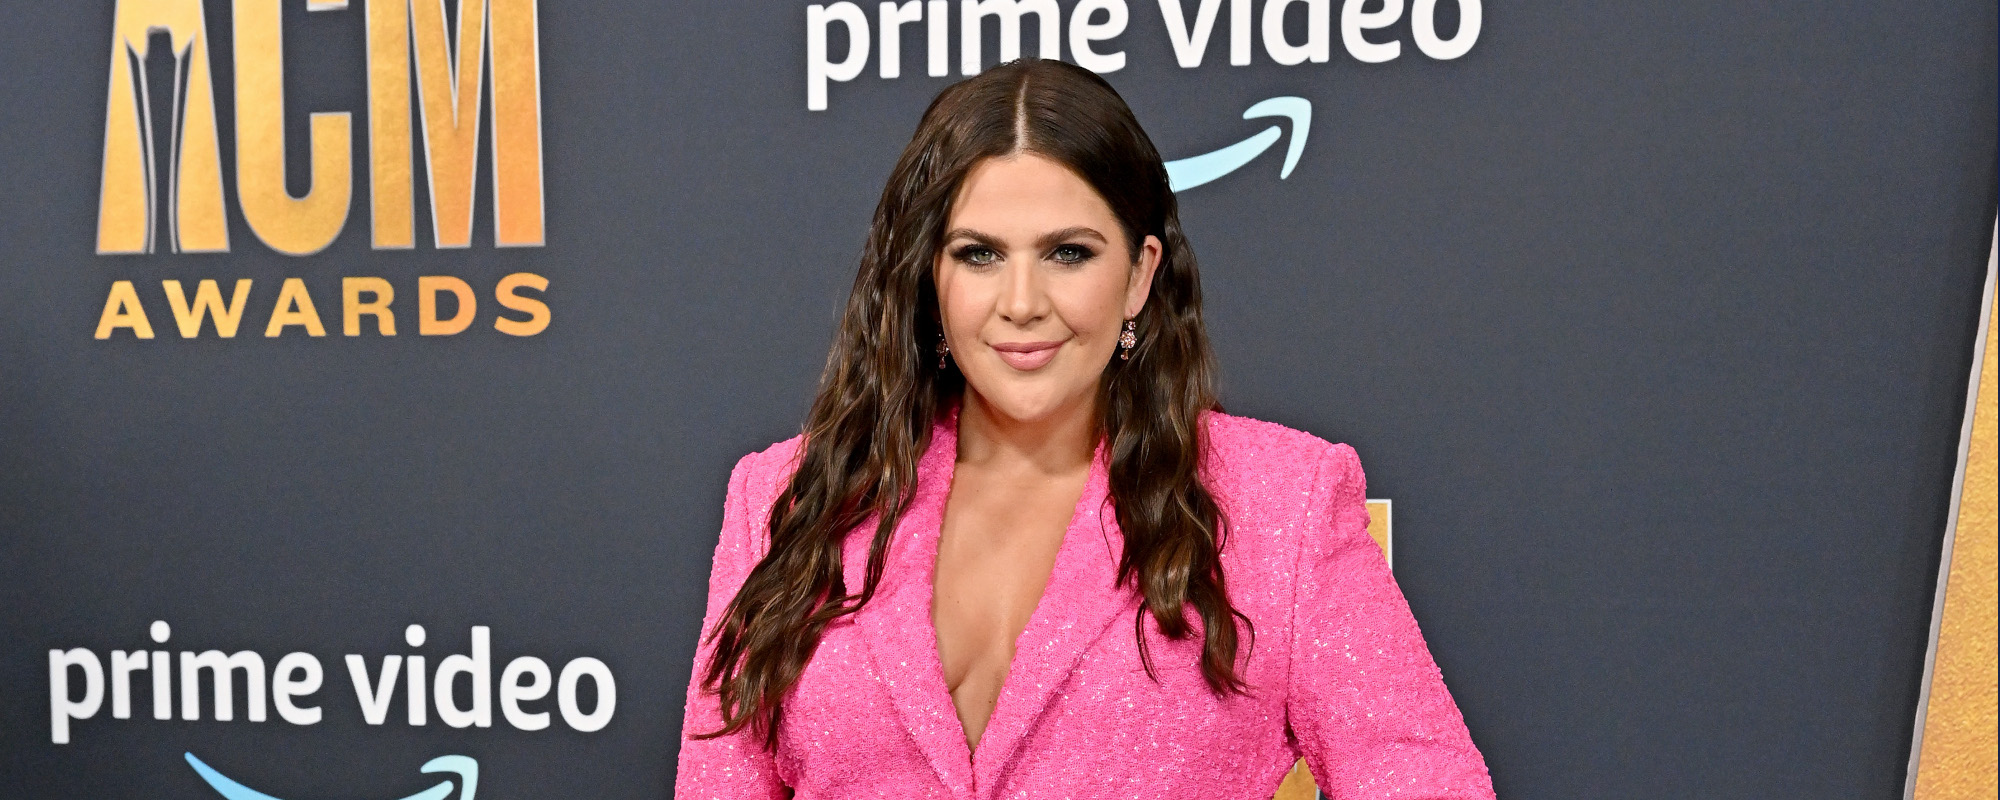 Watch: Lady A’s Hillary Scott’s Adorable 4-Year-Old Daughter Sings “You Can Rest” During Soundcheck